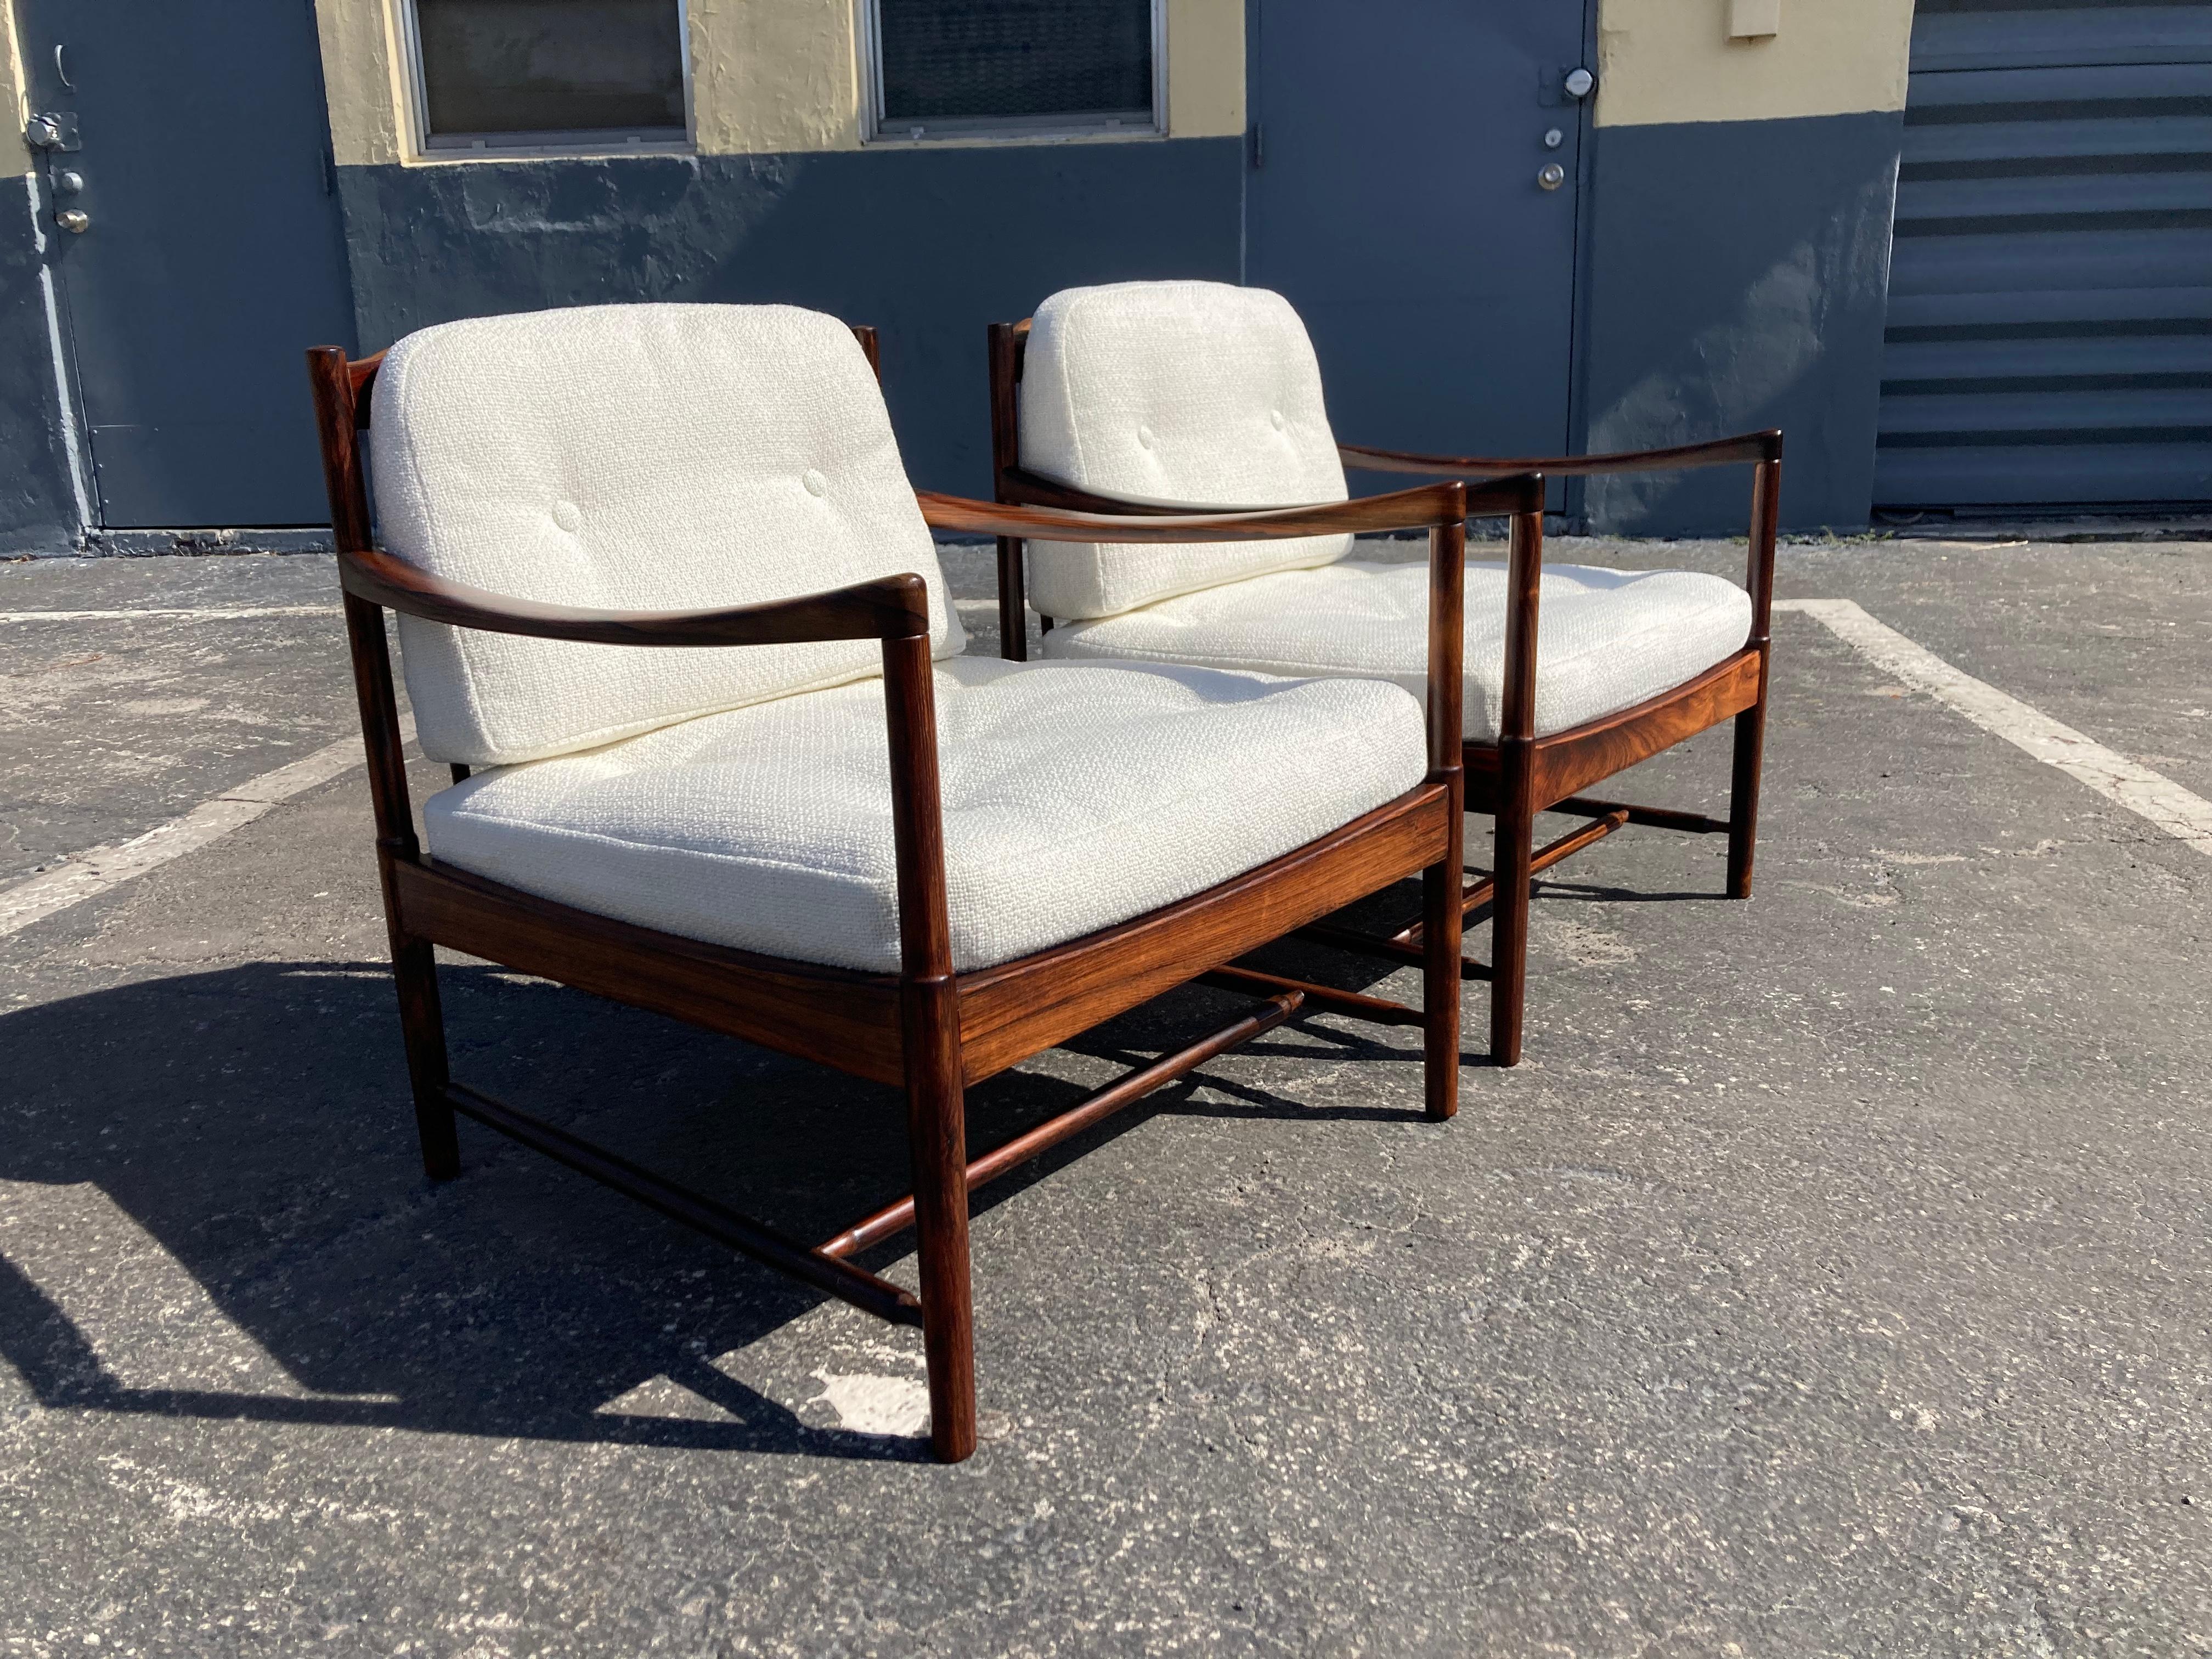 Swedish Pair of Rosewood Lounge Chairs Attributed to Kofod Larsen, Danish Modern For Sale